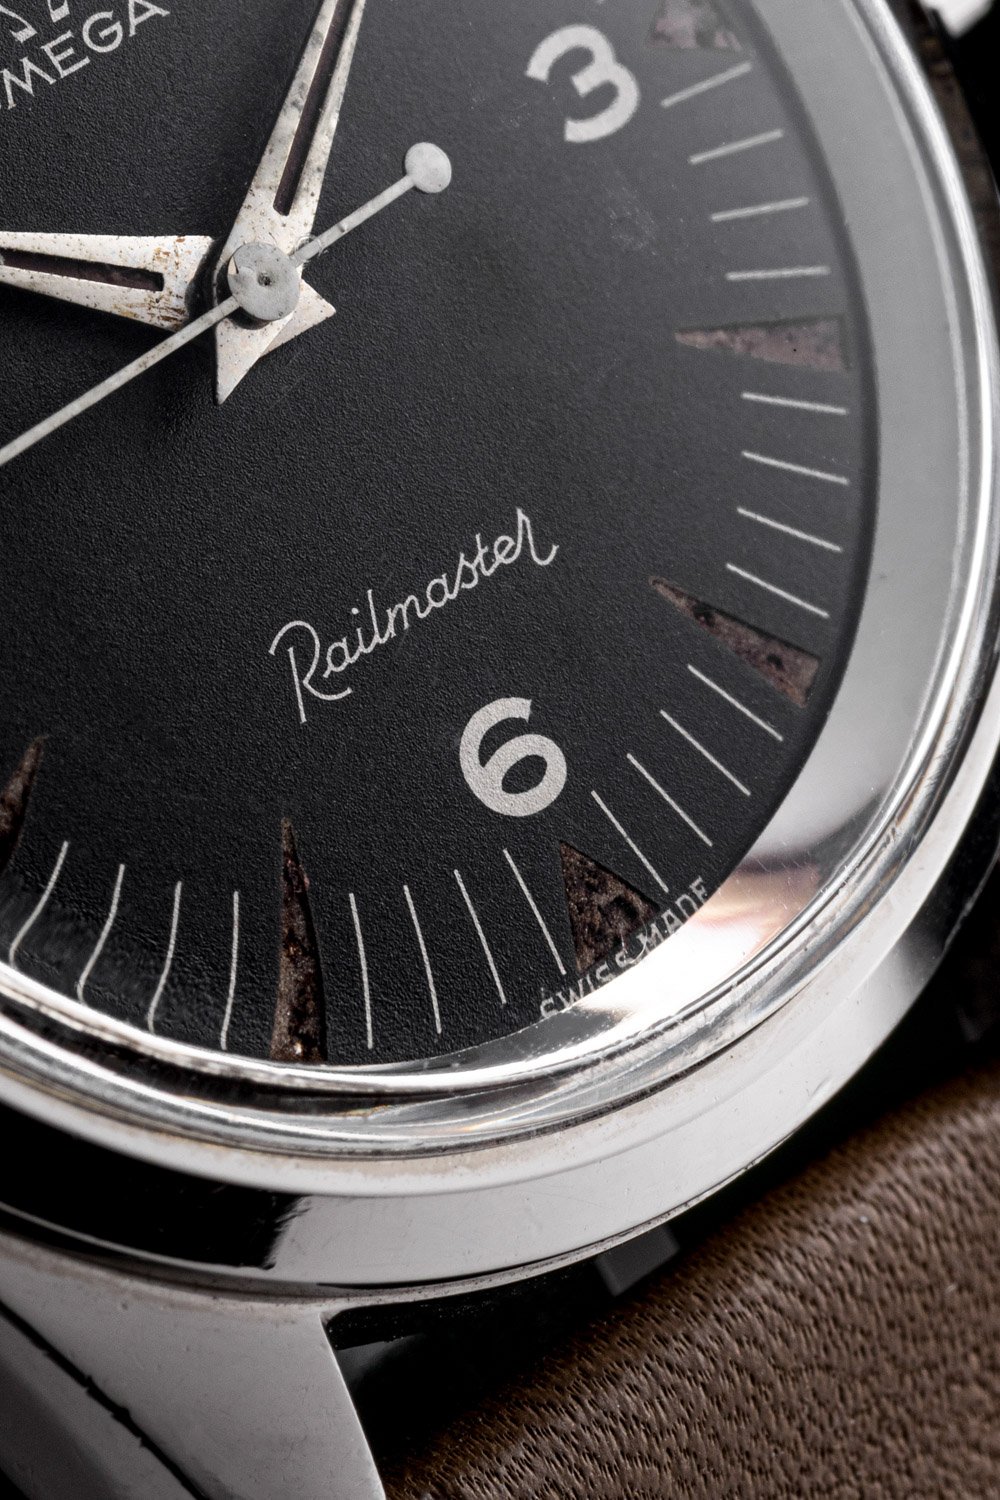 How to tell when a vintage watch was made Omega Railmaster radium lume